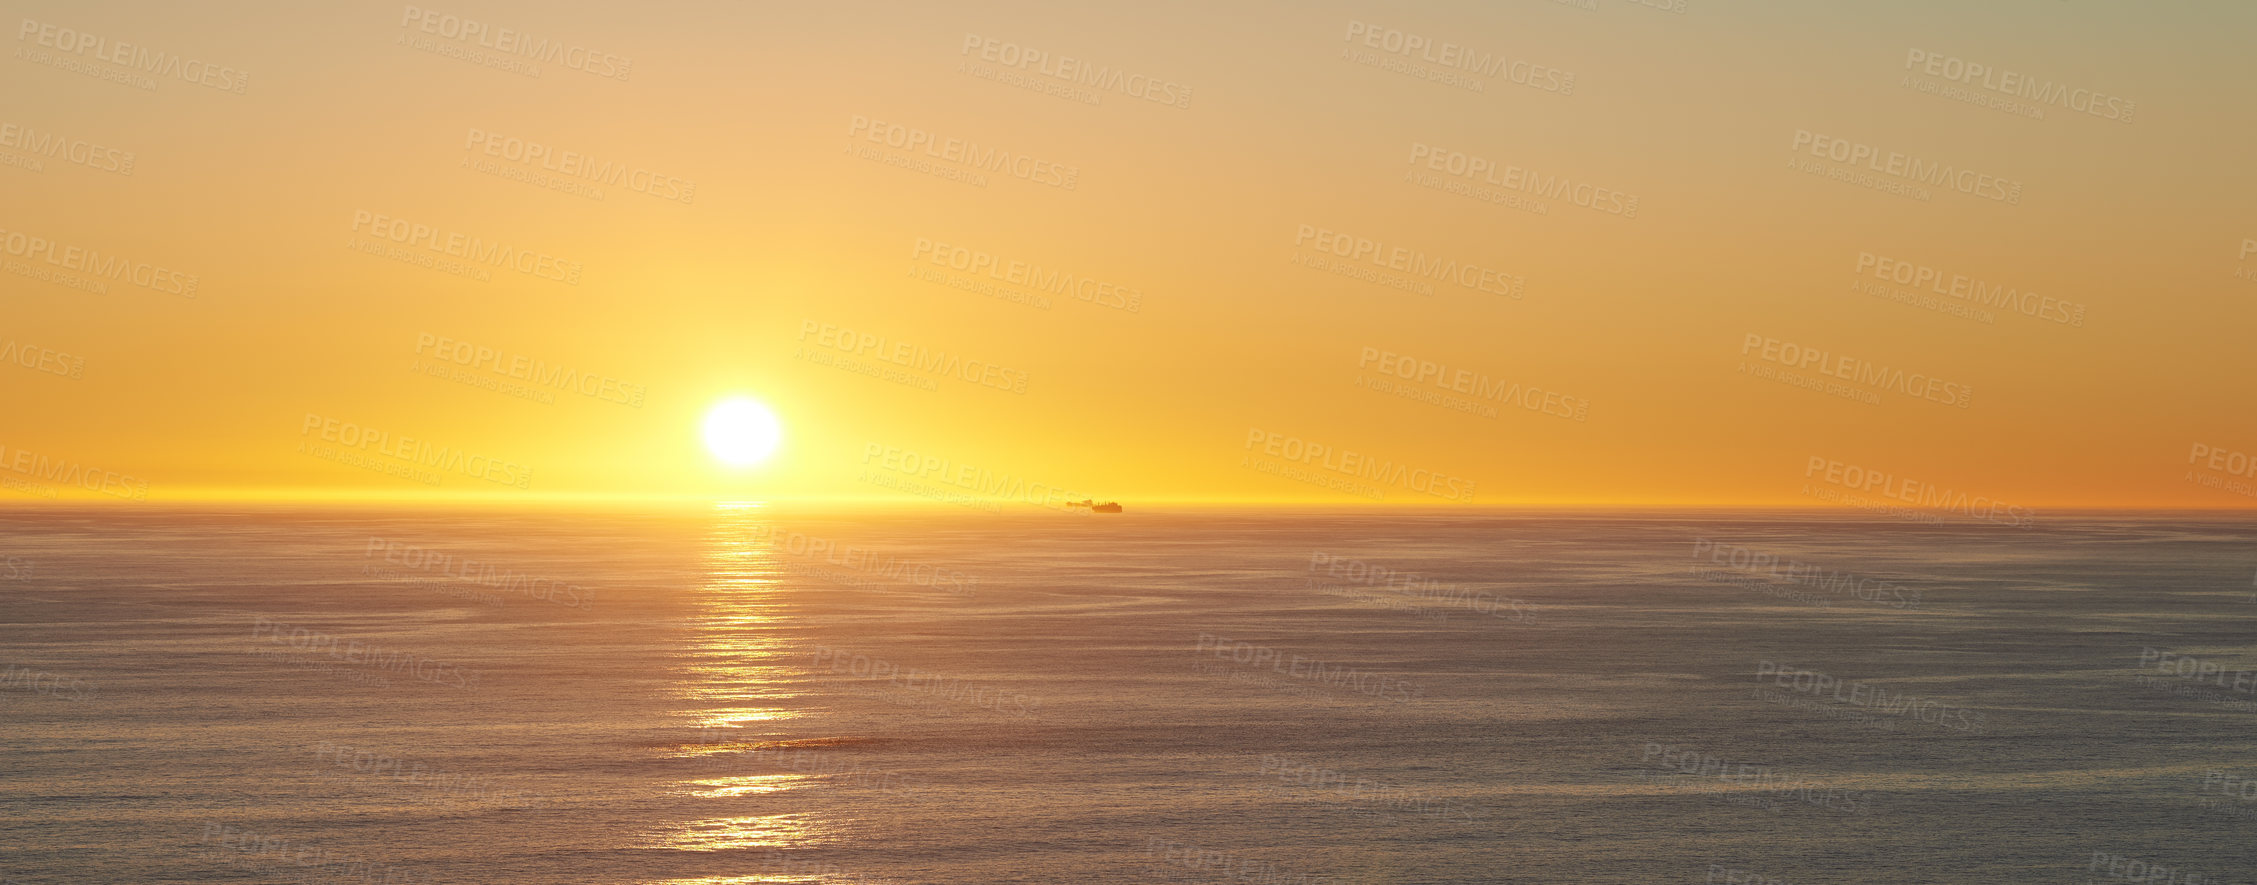 Buy stock photo Sky, sunset and sea at morning on the horizon with ocean and waves landscape. Sunrise background, calm weather and summer by the beach with coastline and outdoor environment with mockup in nature